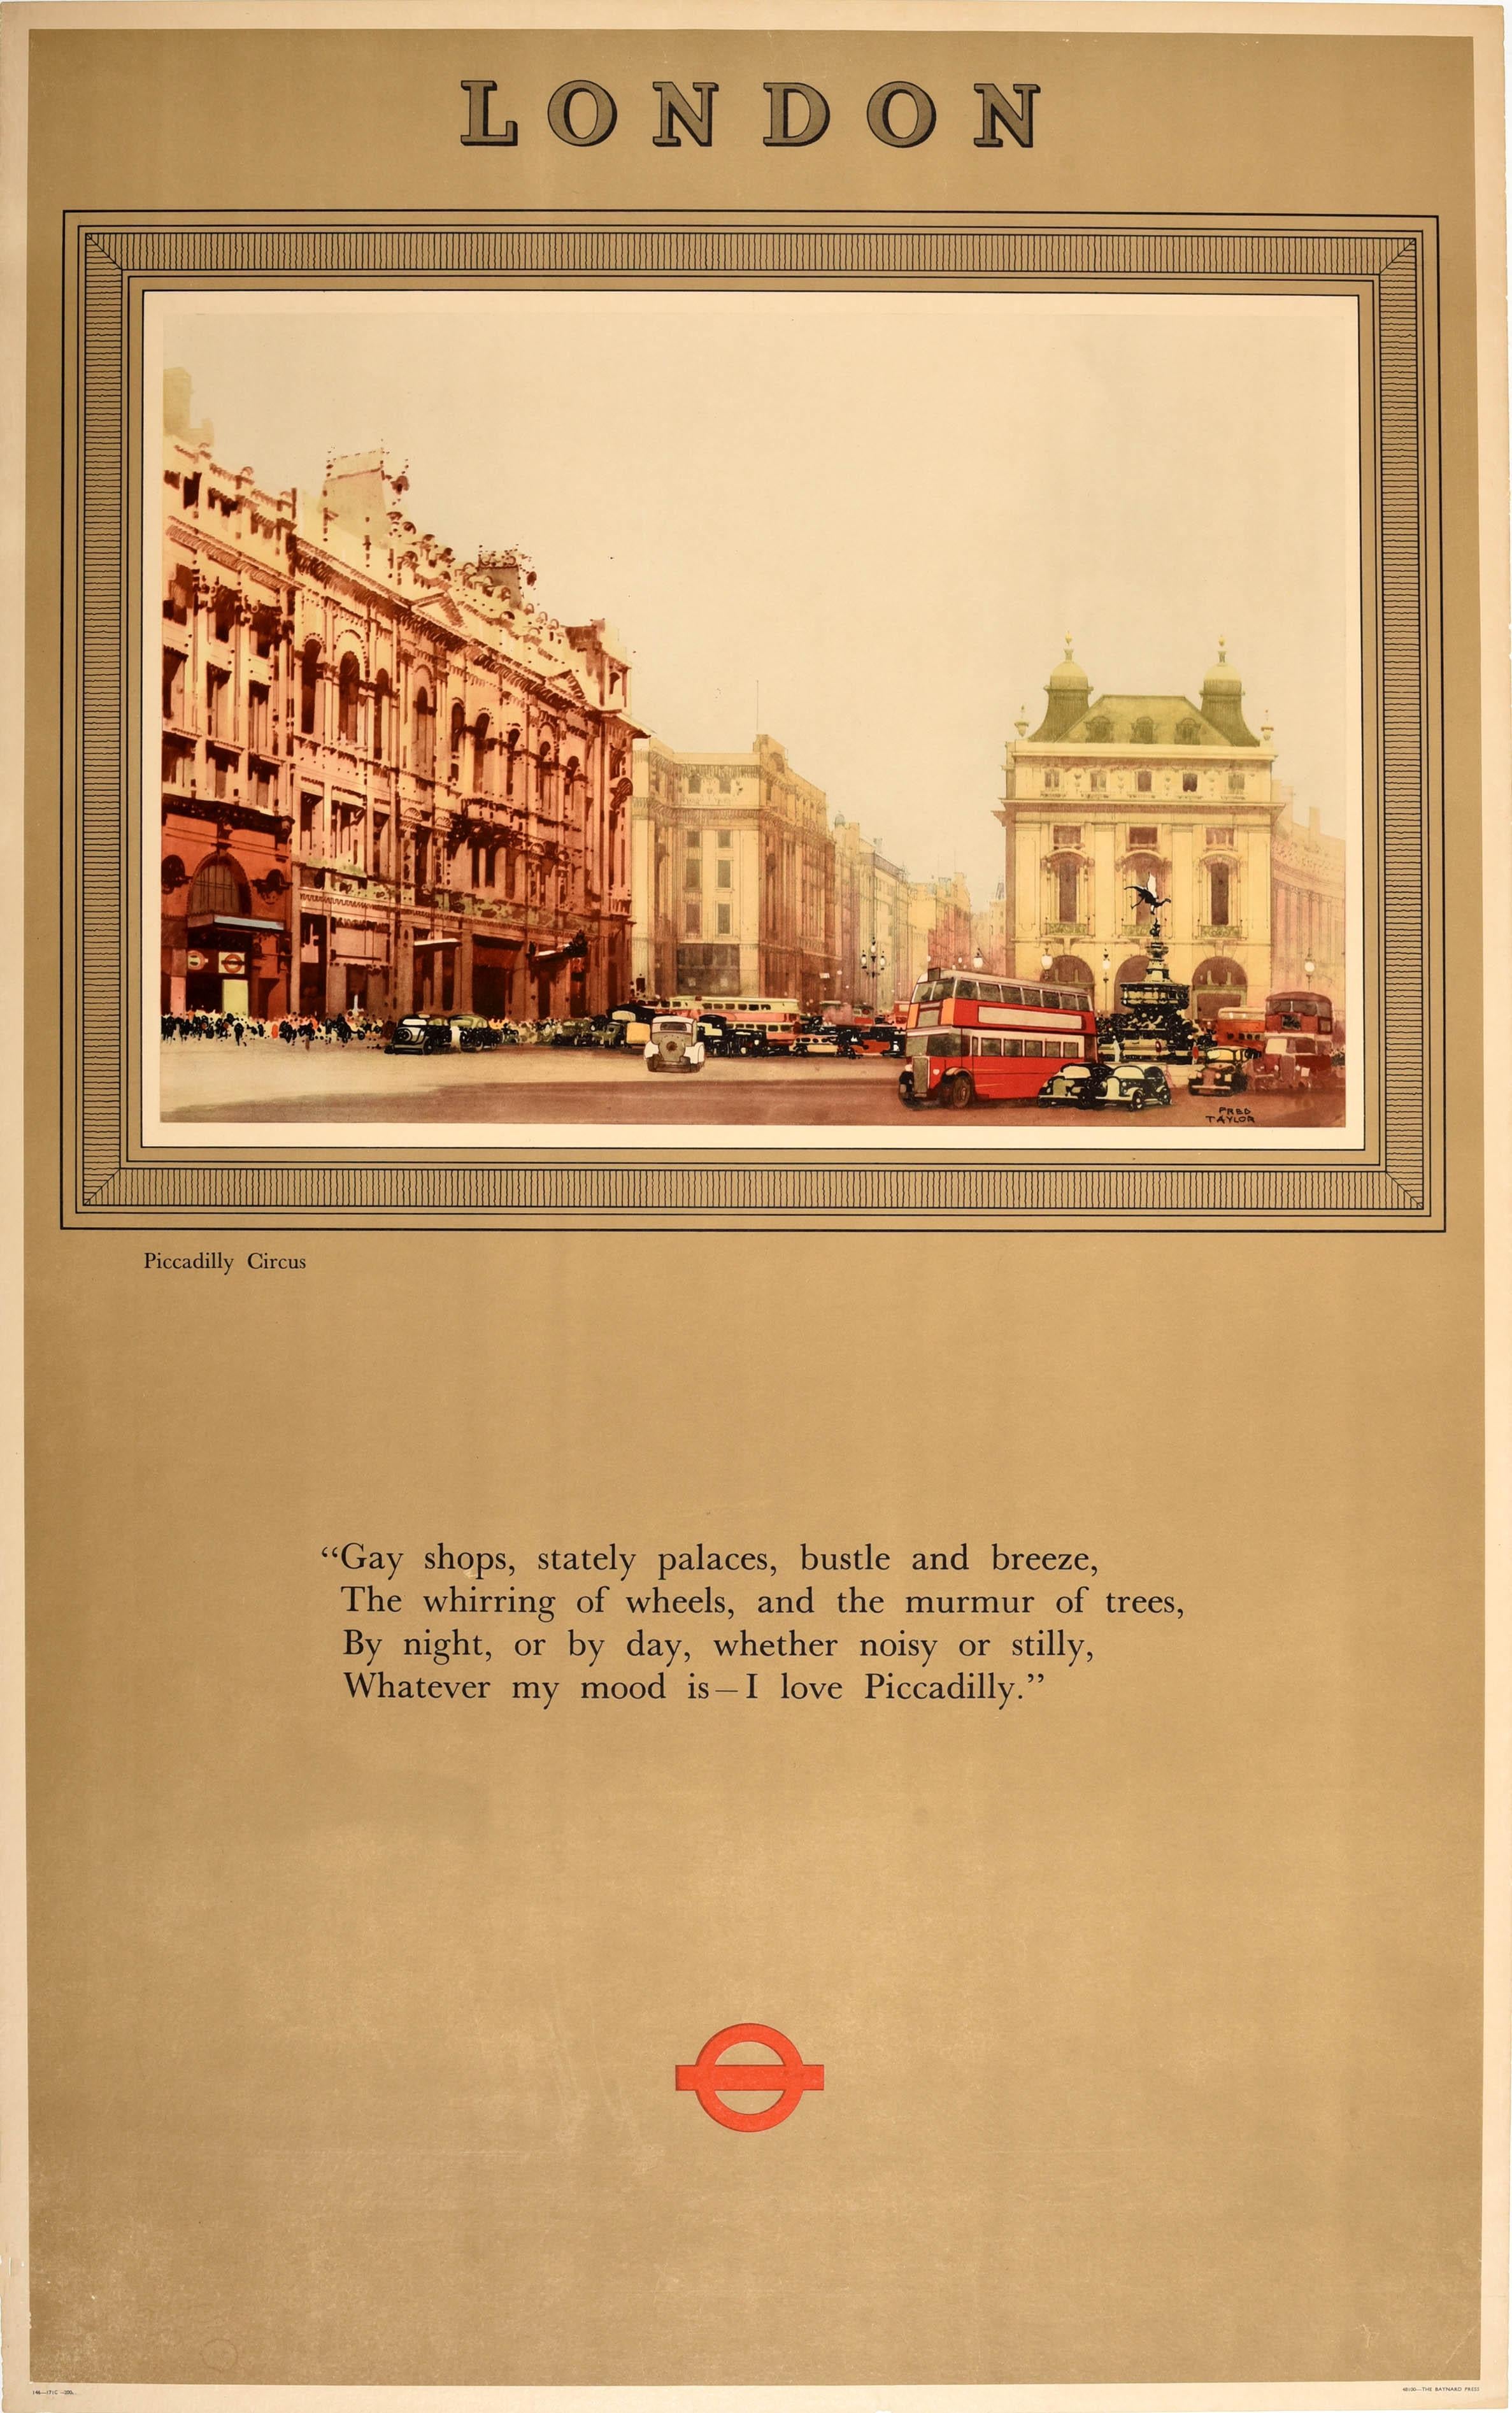 Fred Taylor Print - Original Vintage Post War London Underground Transport Poster Piccadilly Circus